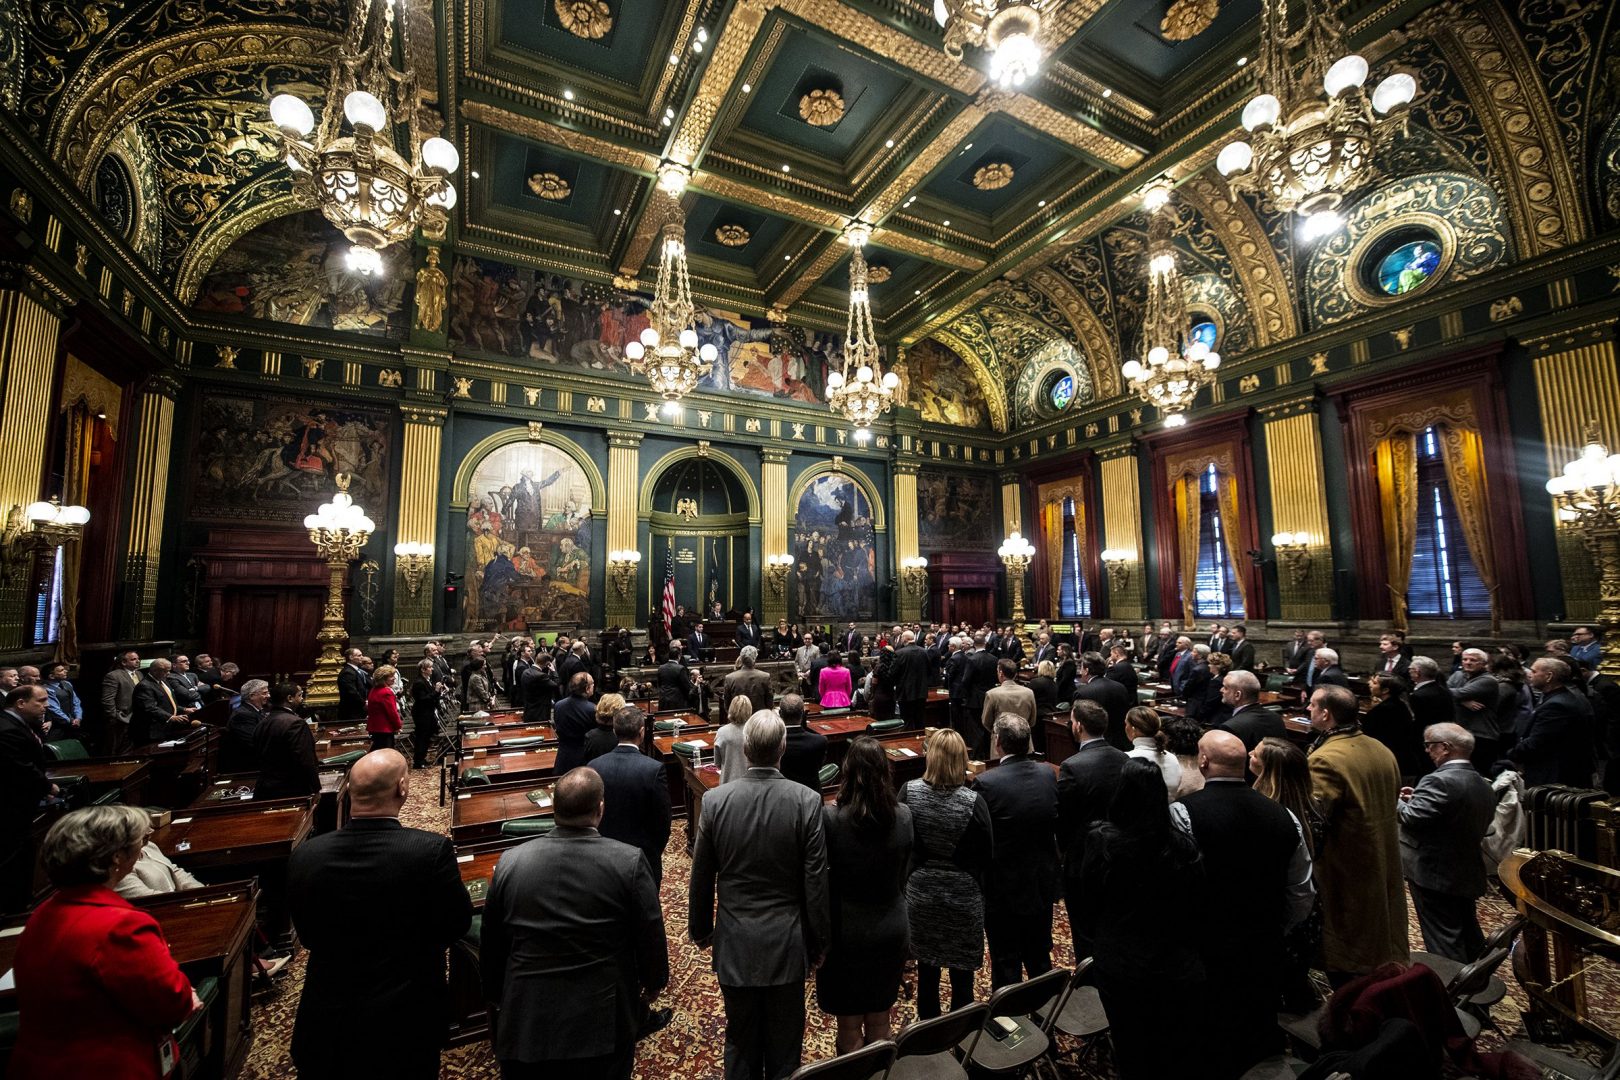 The state Senate on Thursday passed the $25 billion budget 44-6, just two days after the House first presented the measure and passed it along party lines.